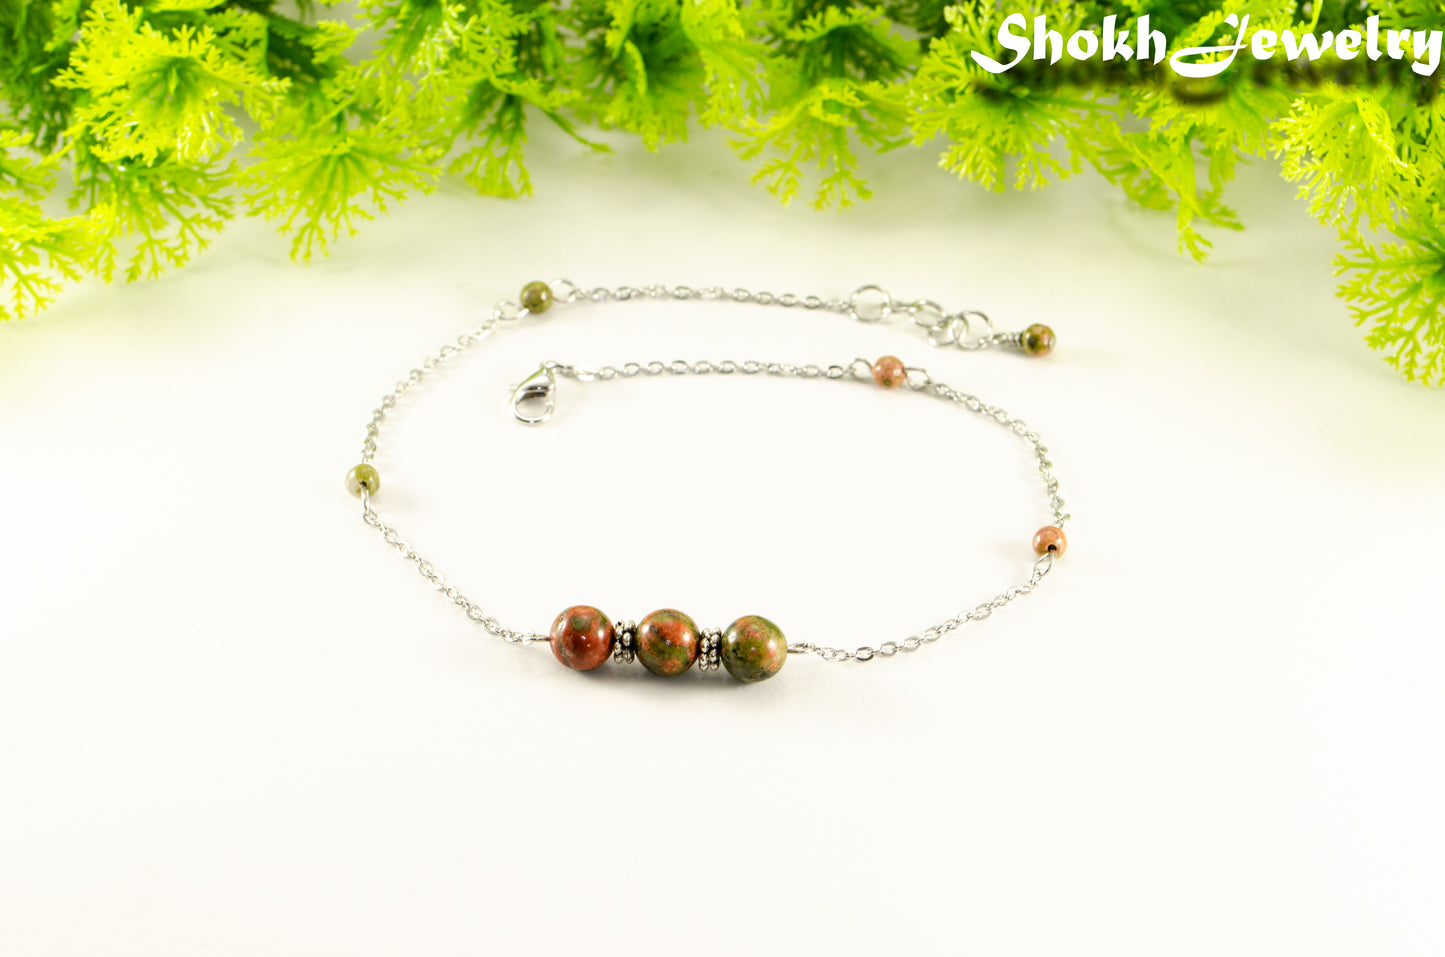 Natural Unakite Jasper and Chain Choker Necklace for women.